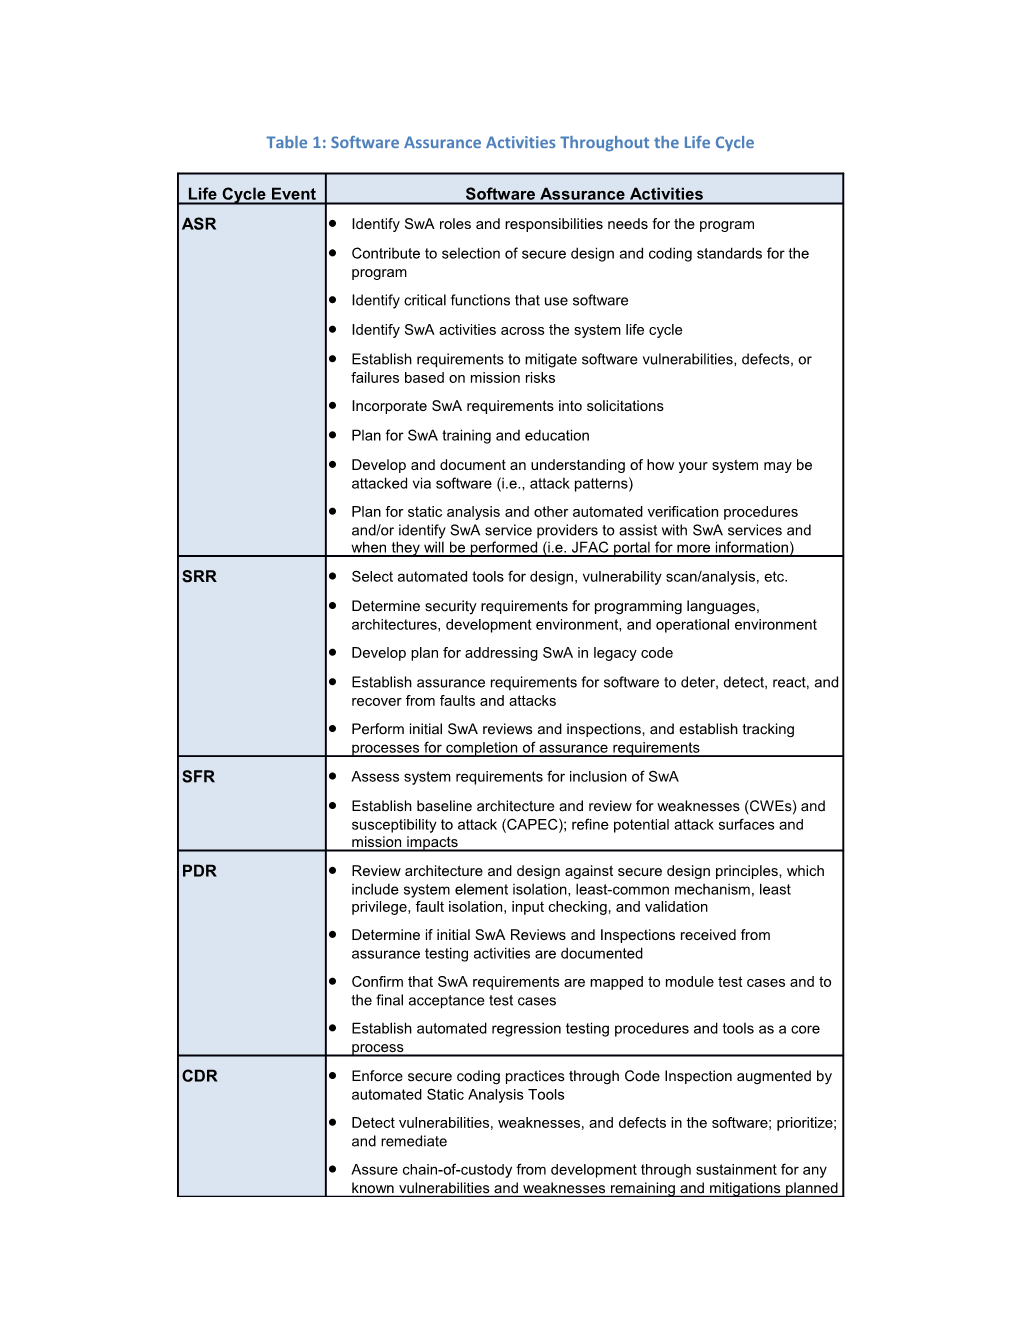 Chapter 9 Table 8: Software Assurance Activities Throughout the Life Cycle